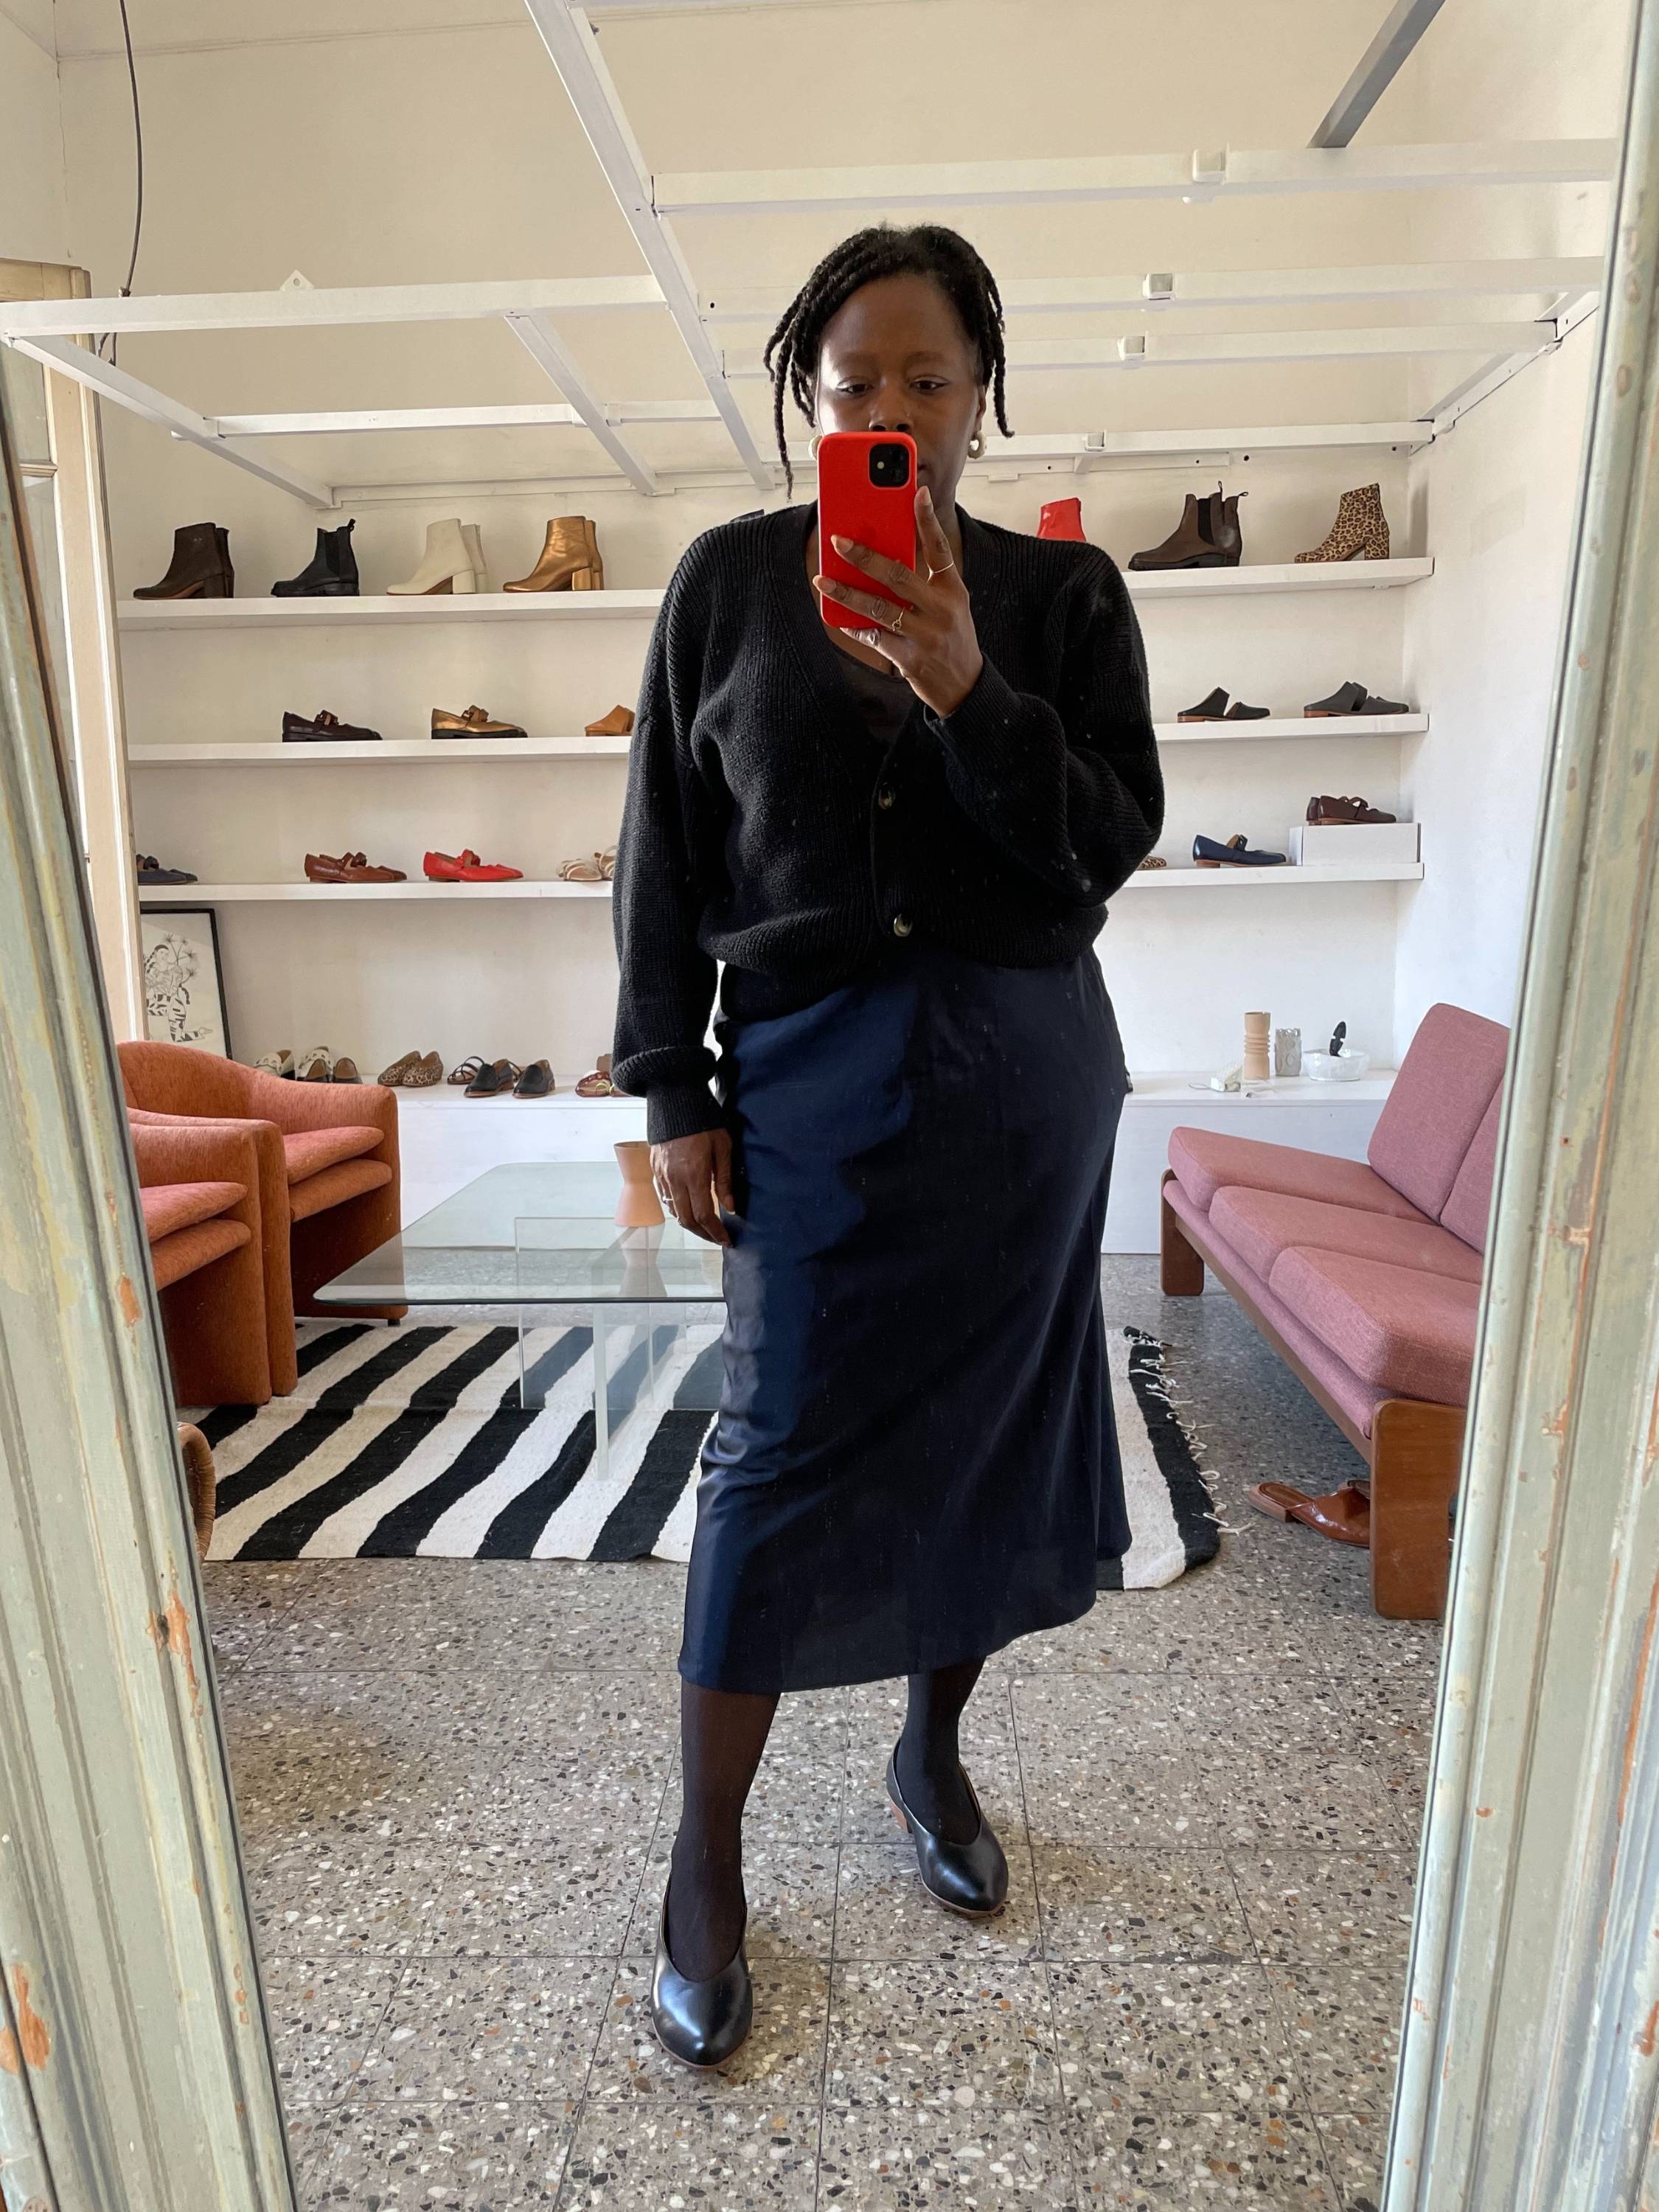 Away From Blue  Aussie Mum Style, Away From The Blue Jeans Rut: Navy and  Burgundy: Dresses In Winter With Tights and Boots